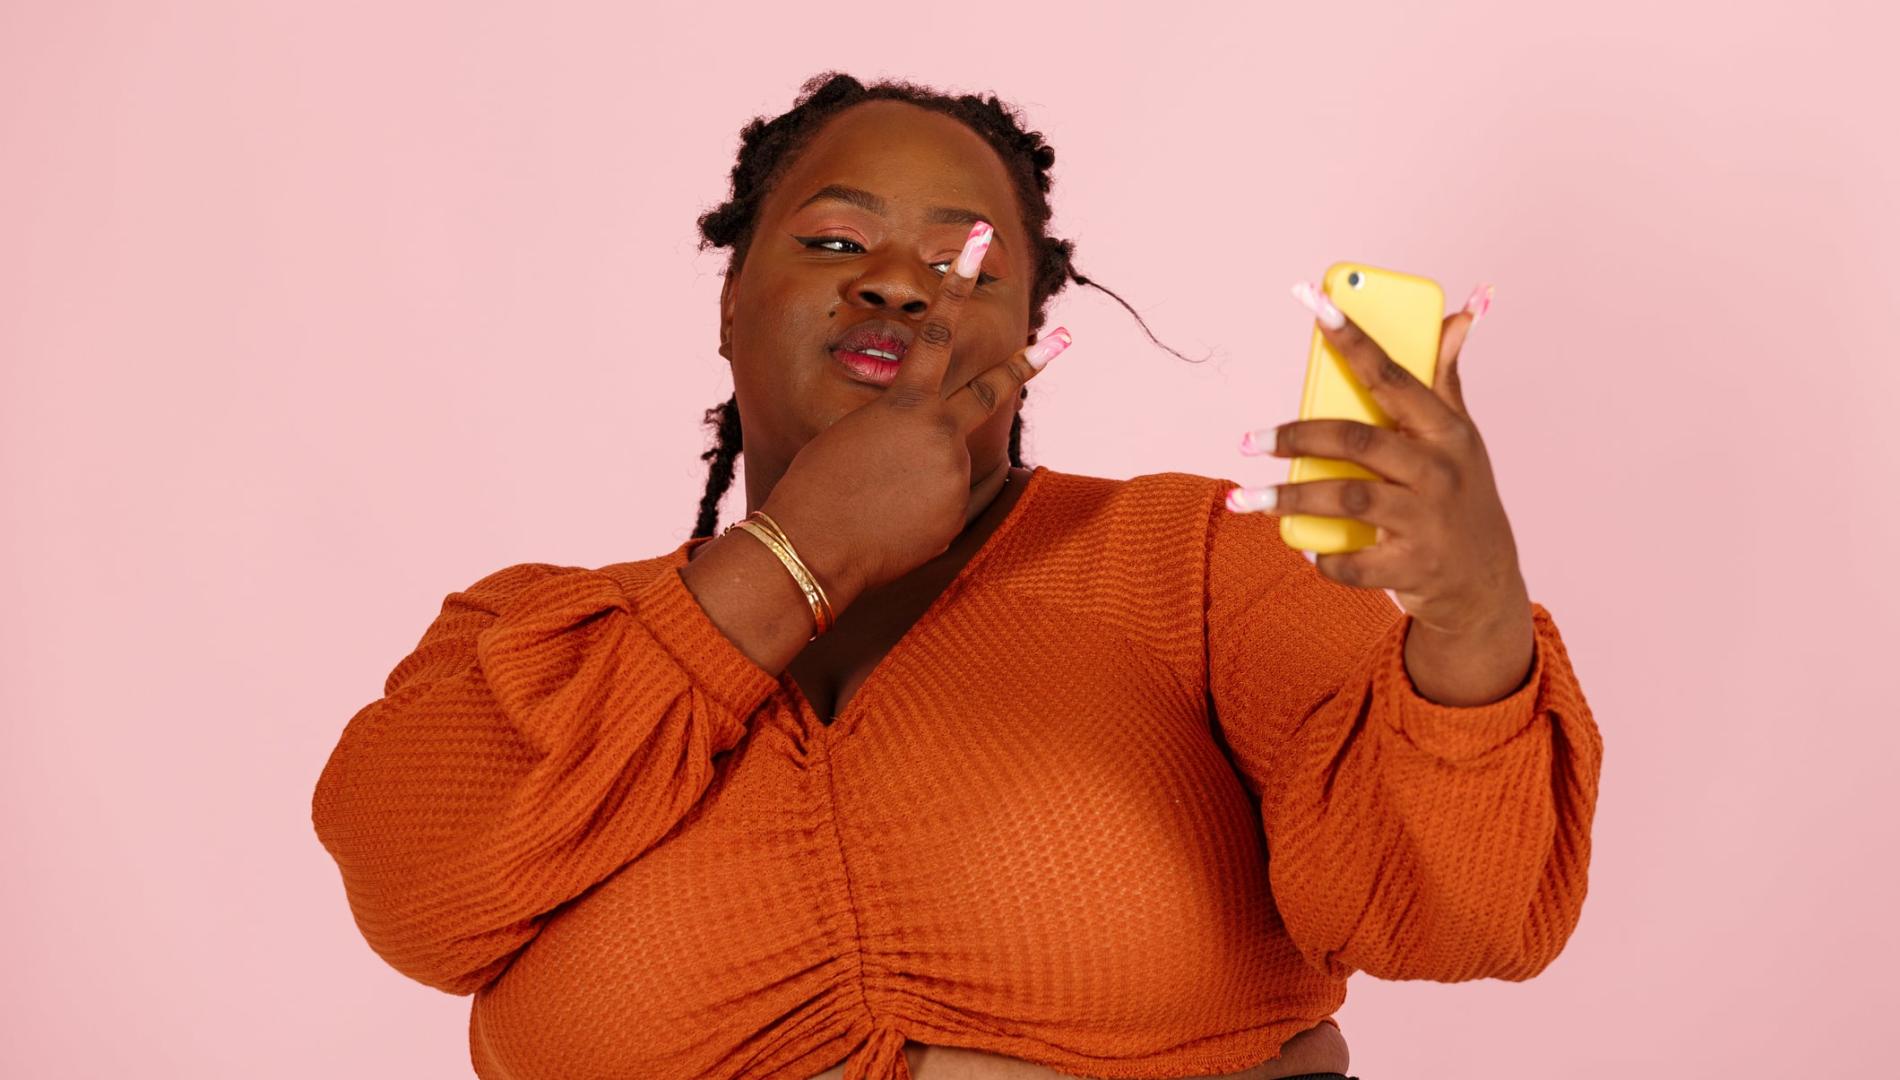 Funny young black woman taking a selfie with mobile phone on pink background